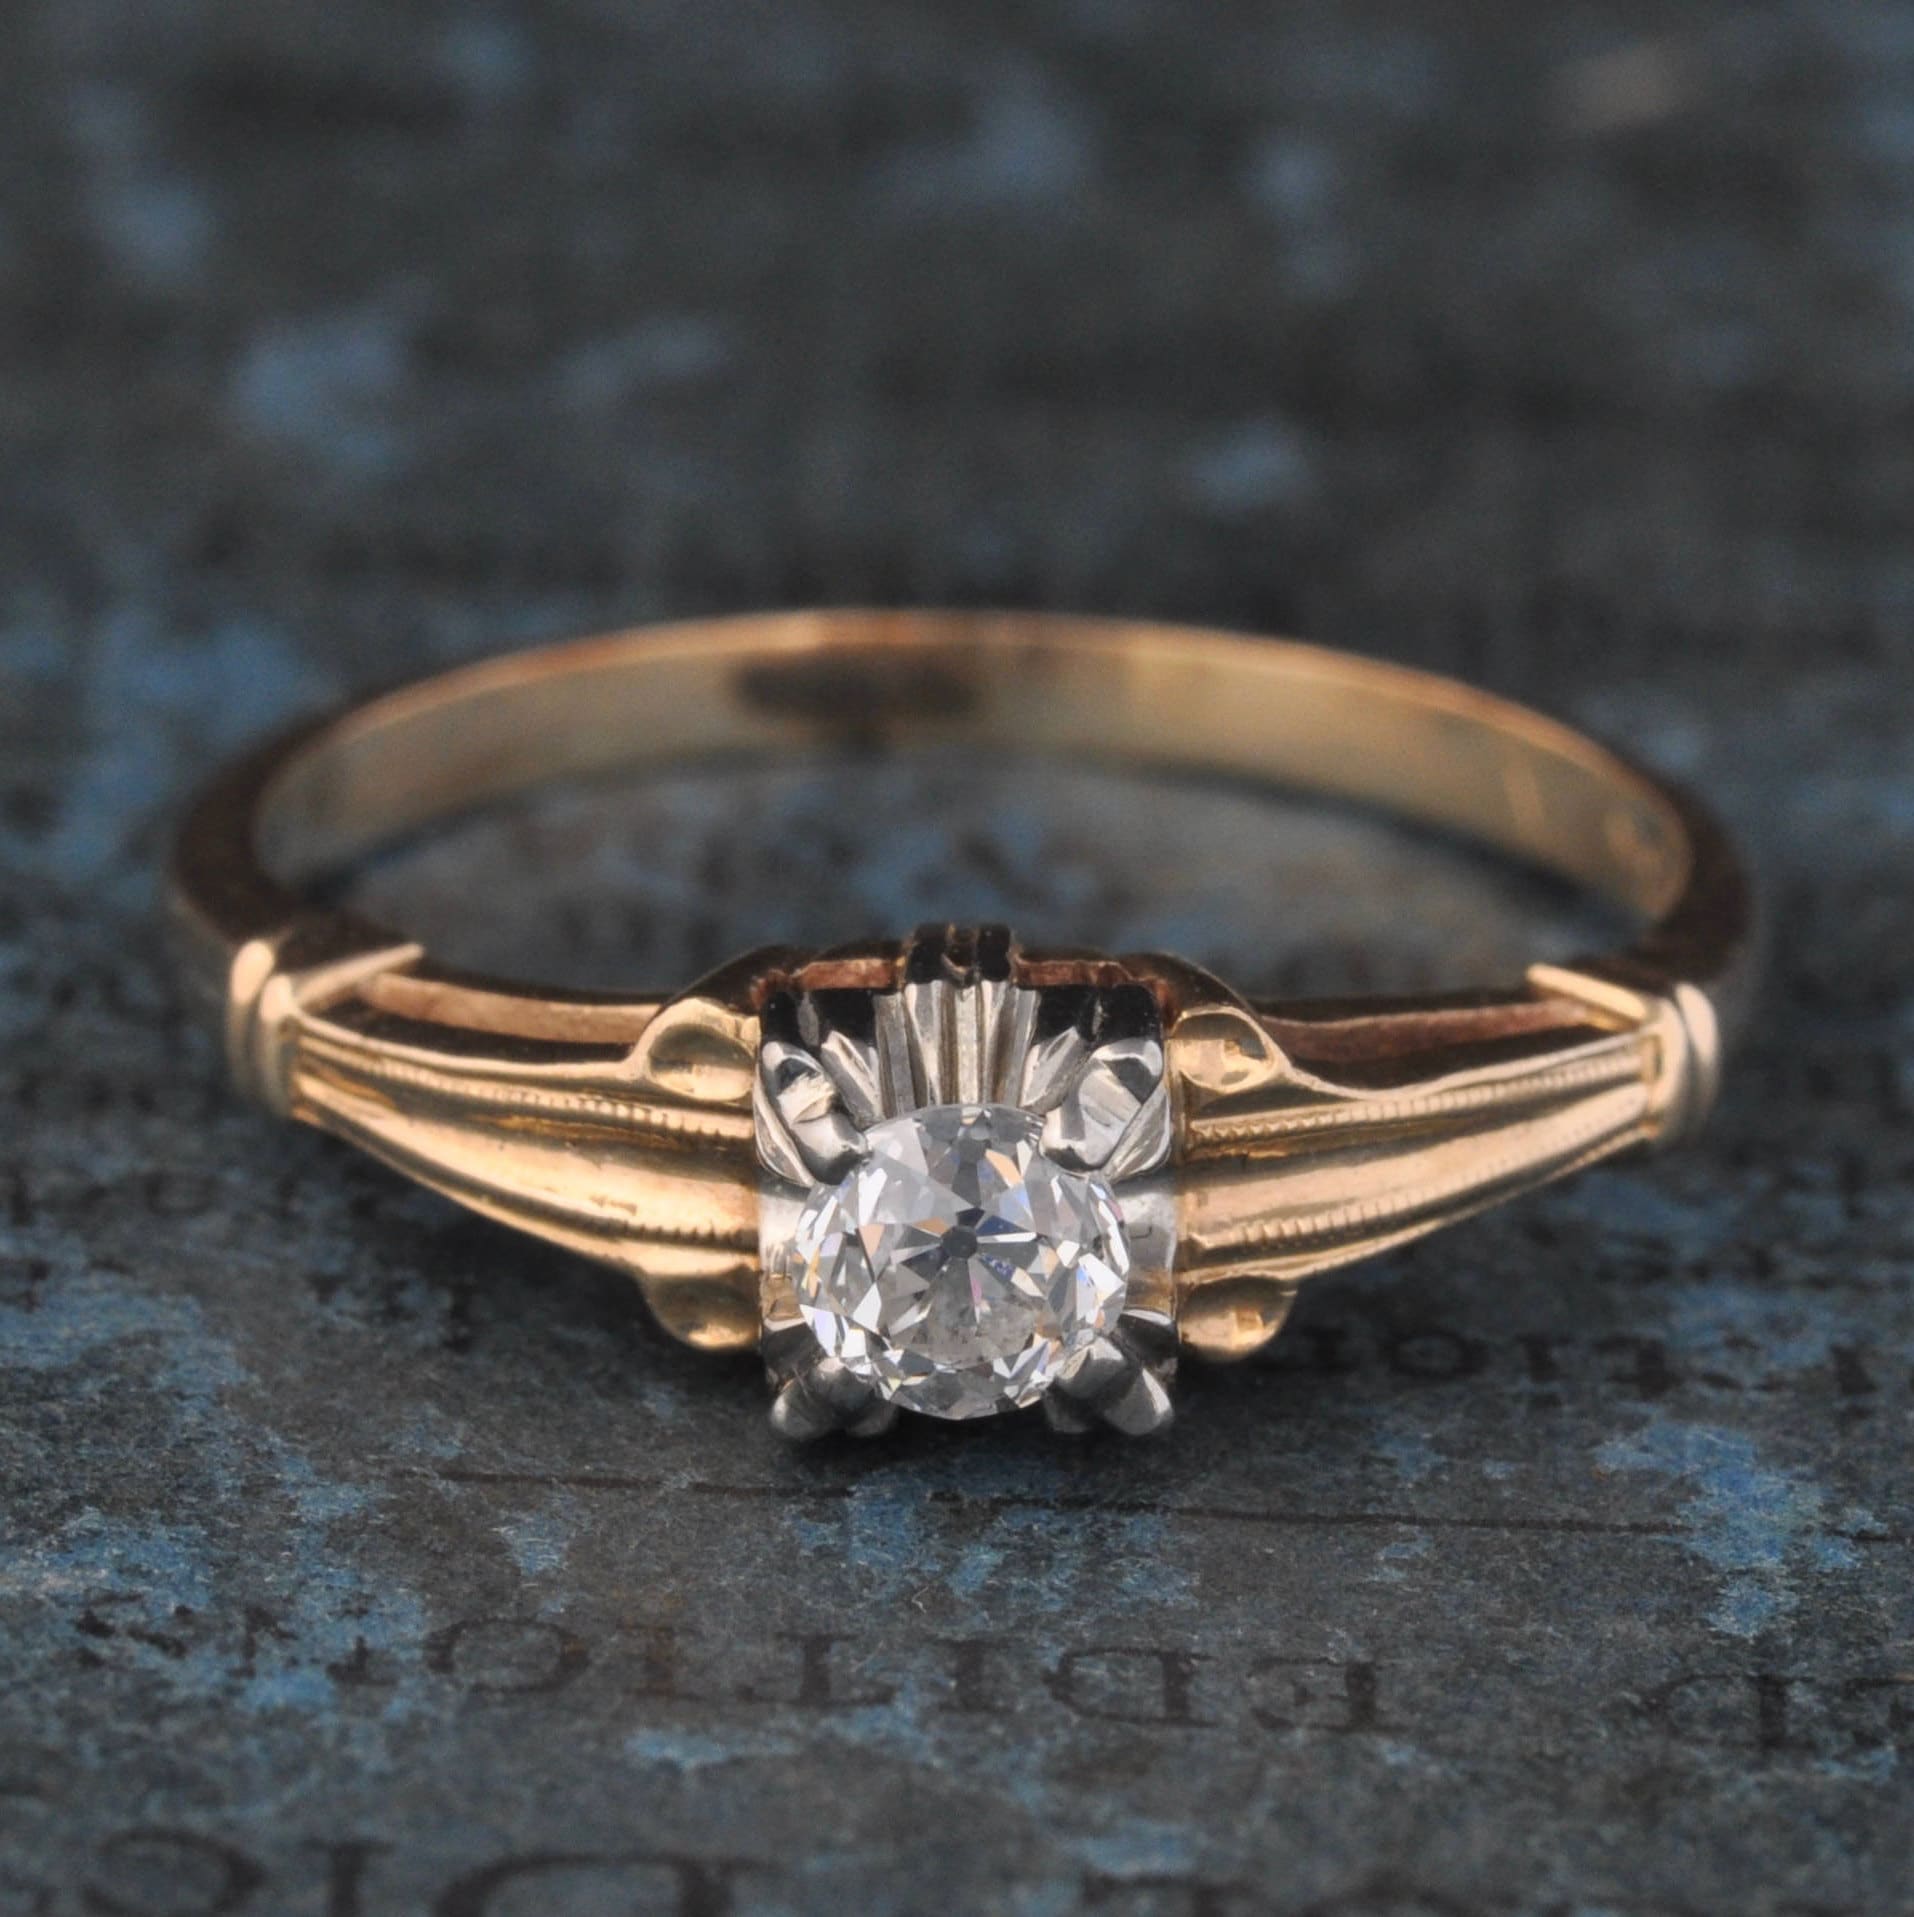 2017 Guide to Vintage and Antique Engagement Rings - Invaluable